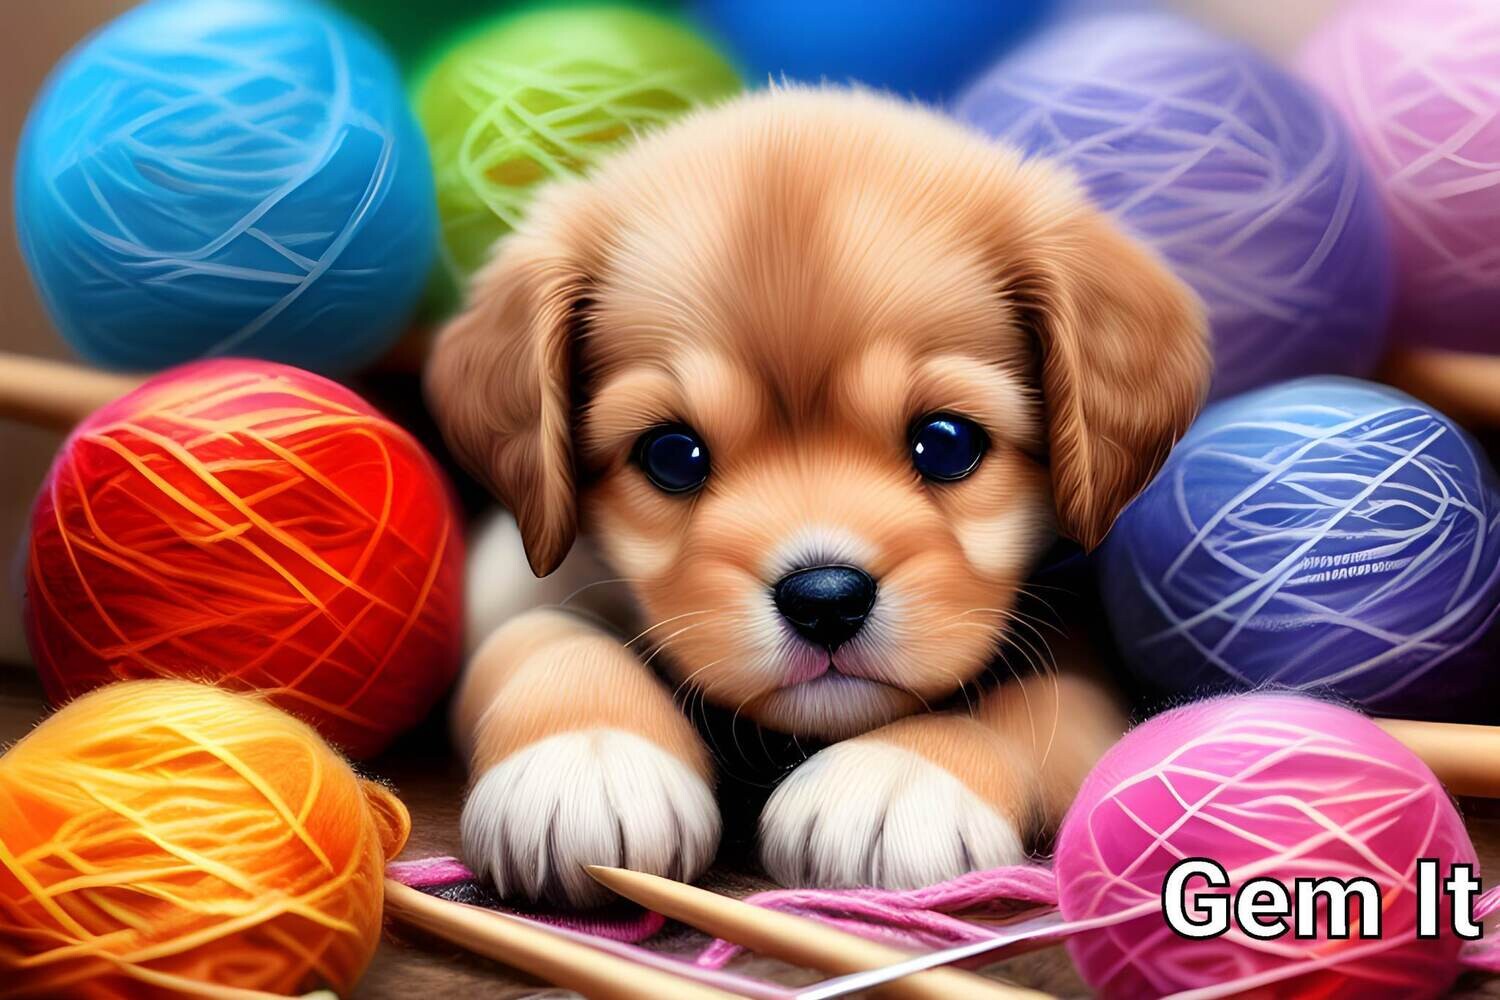 Puppy in the Yarn - Specially ordered for you. Delivery is approximately 4 - 6 weeks.